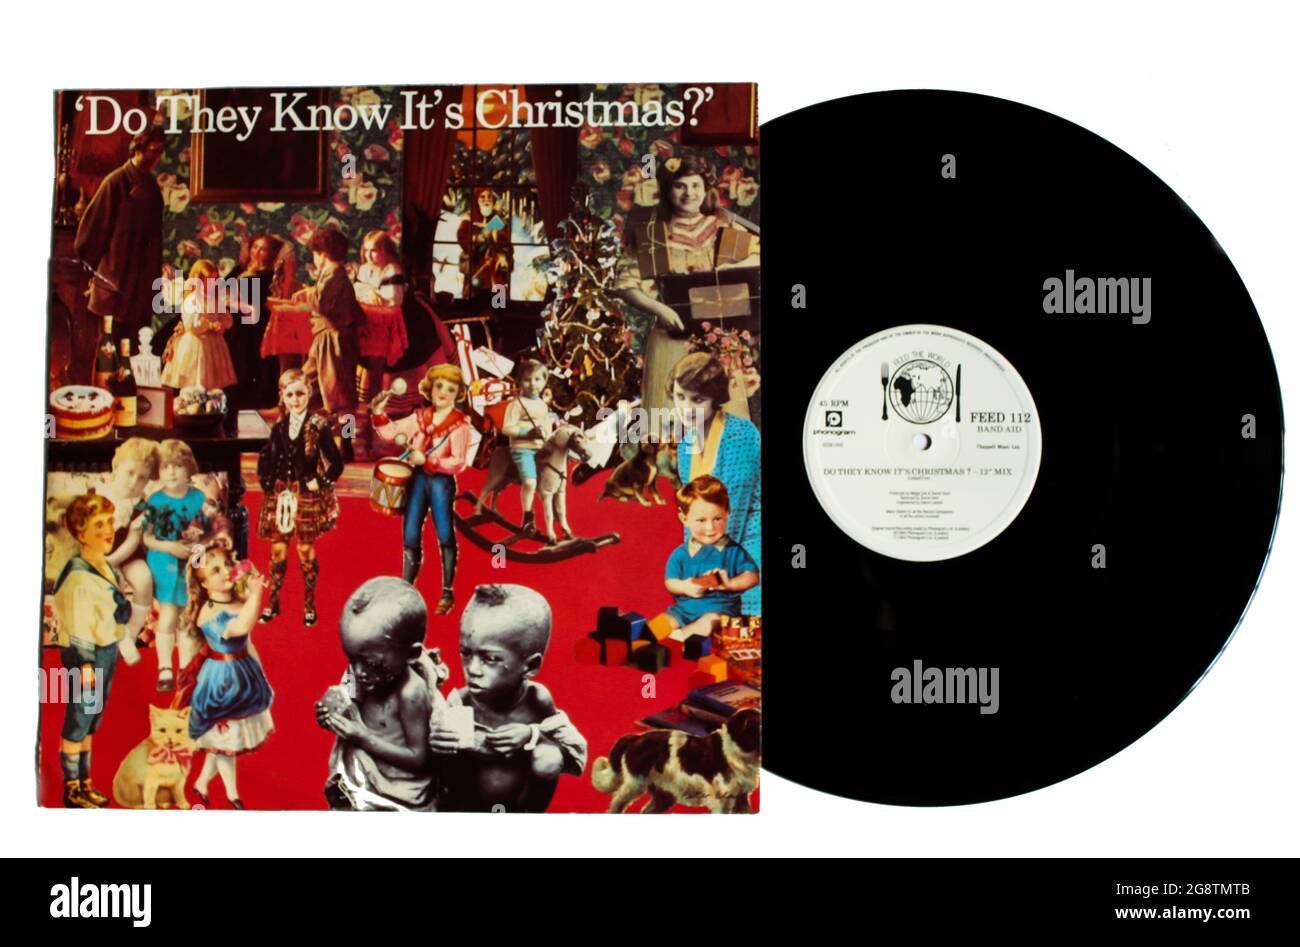 Do They Know It's Christmas? is a song written in 1984 to reports about famine in Ethiopia by Band Aid, supergroup music album on vinyl record LP disc Stock Photo